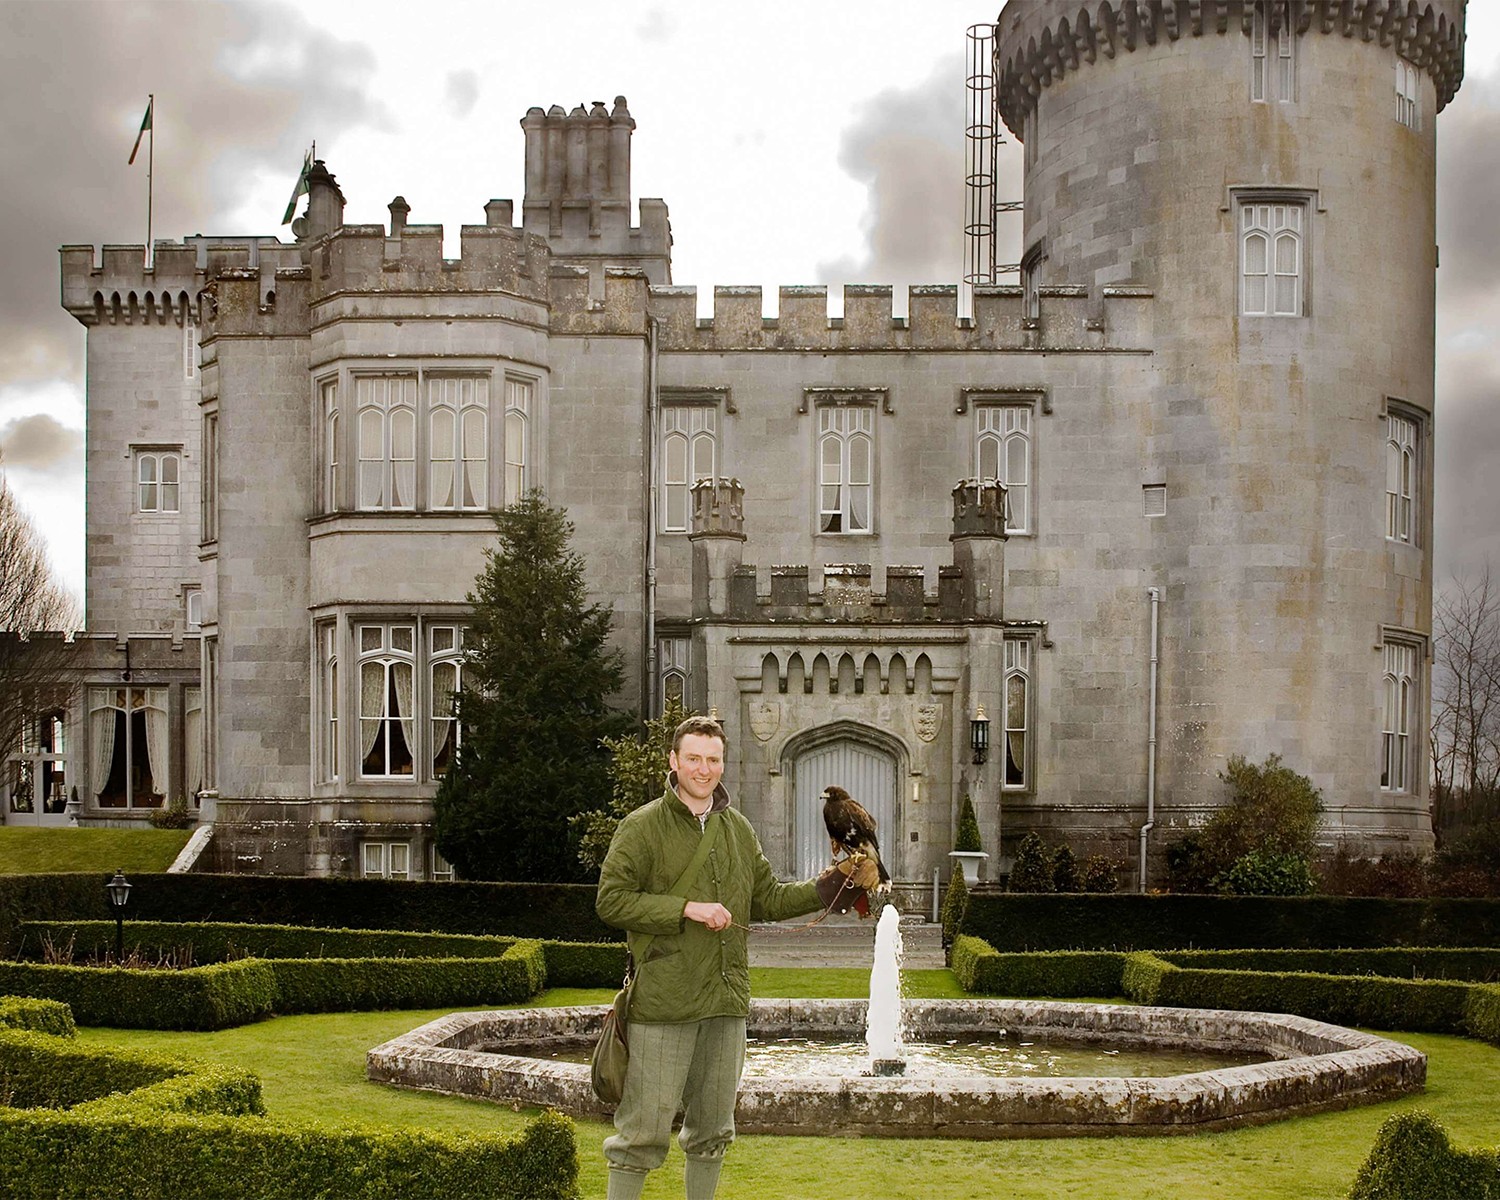 Dromoland Castle - One Night in the Castle of Kings